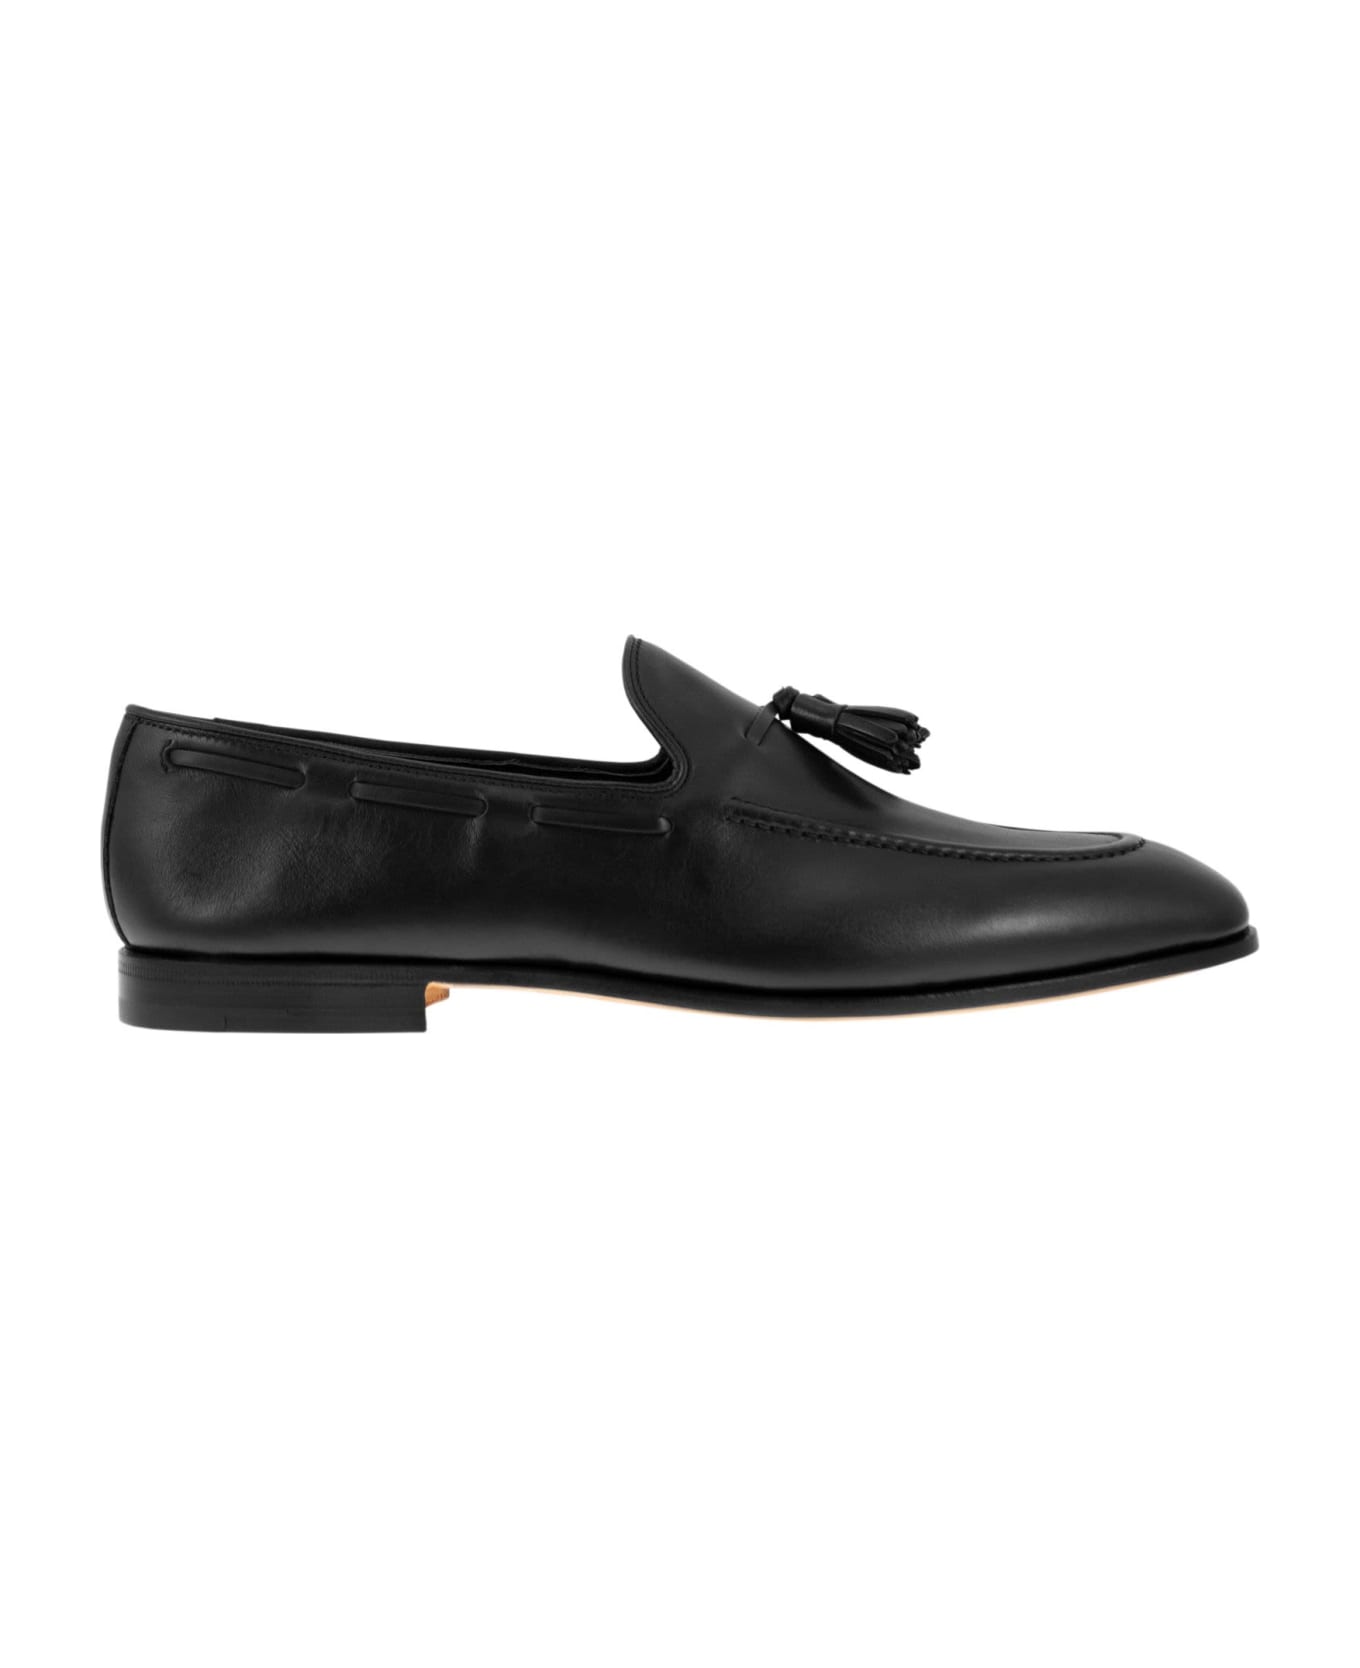 Church's Brushed Calf Leather Loafer - Black